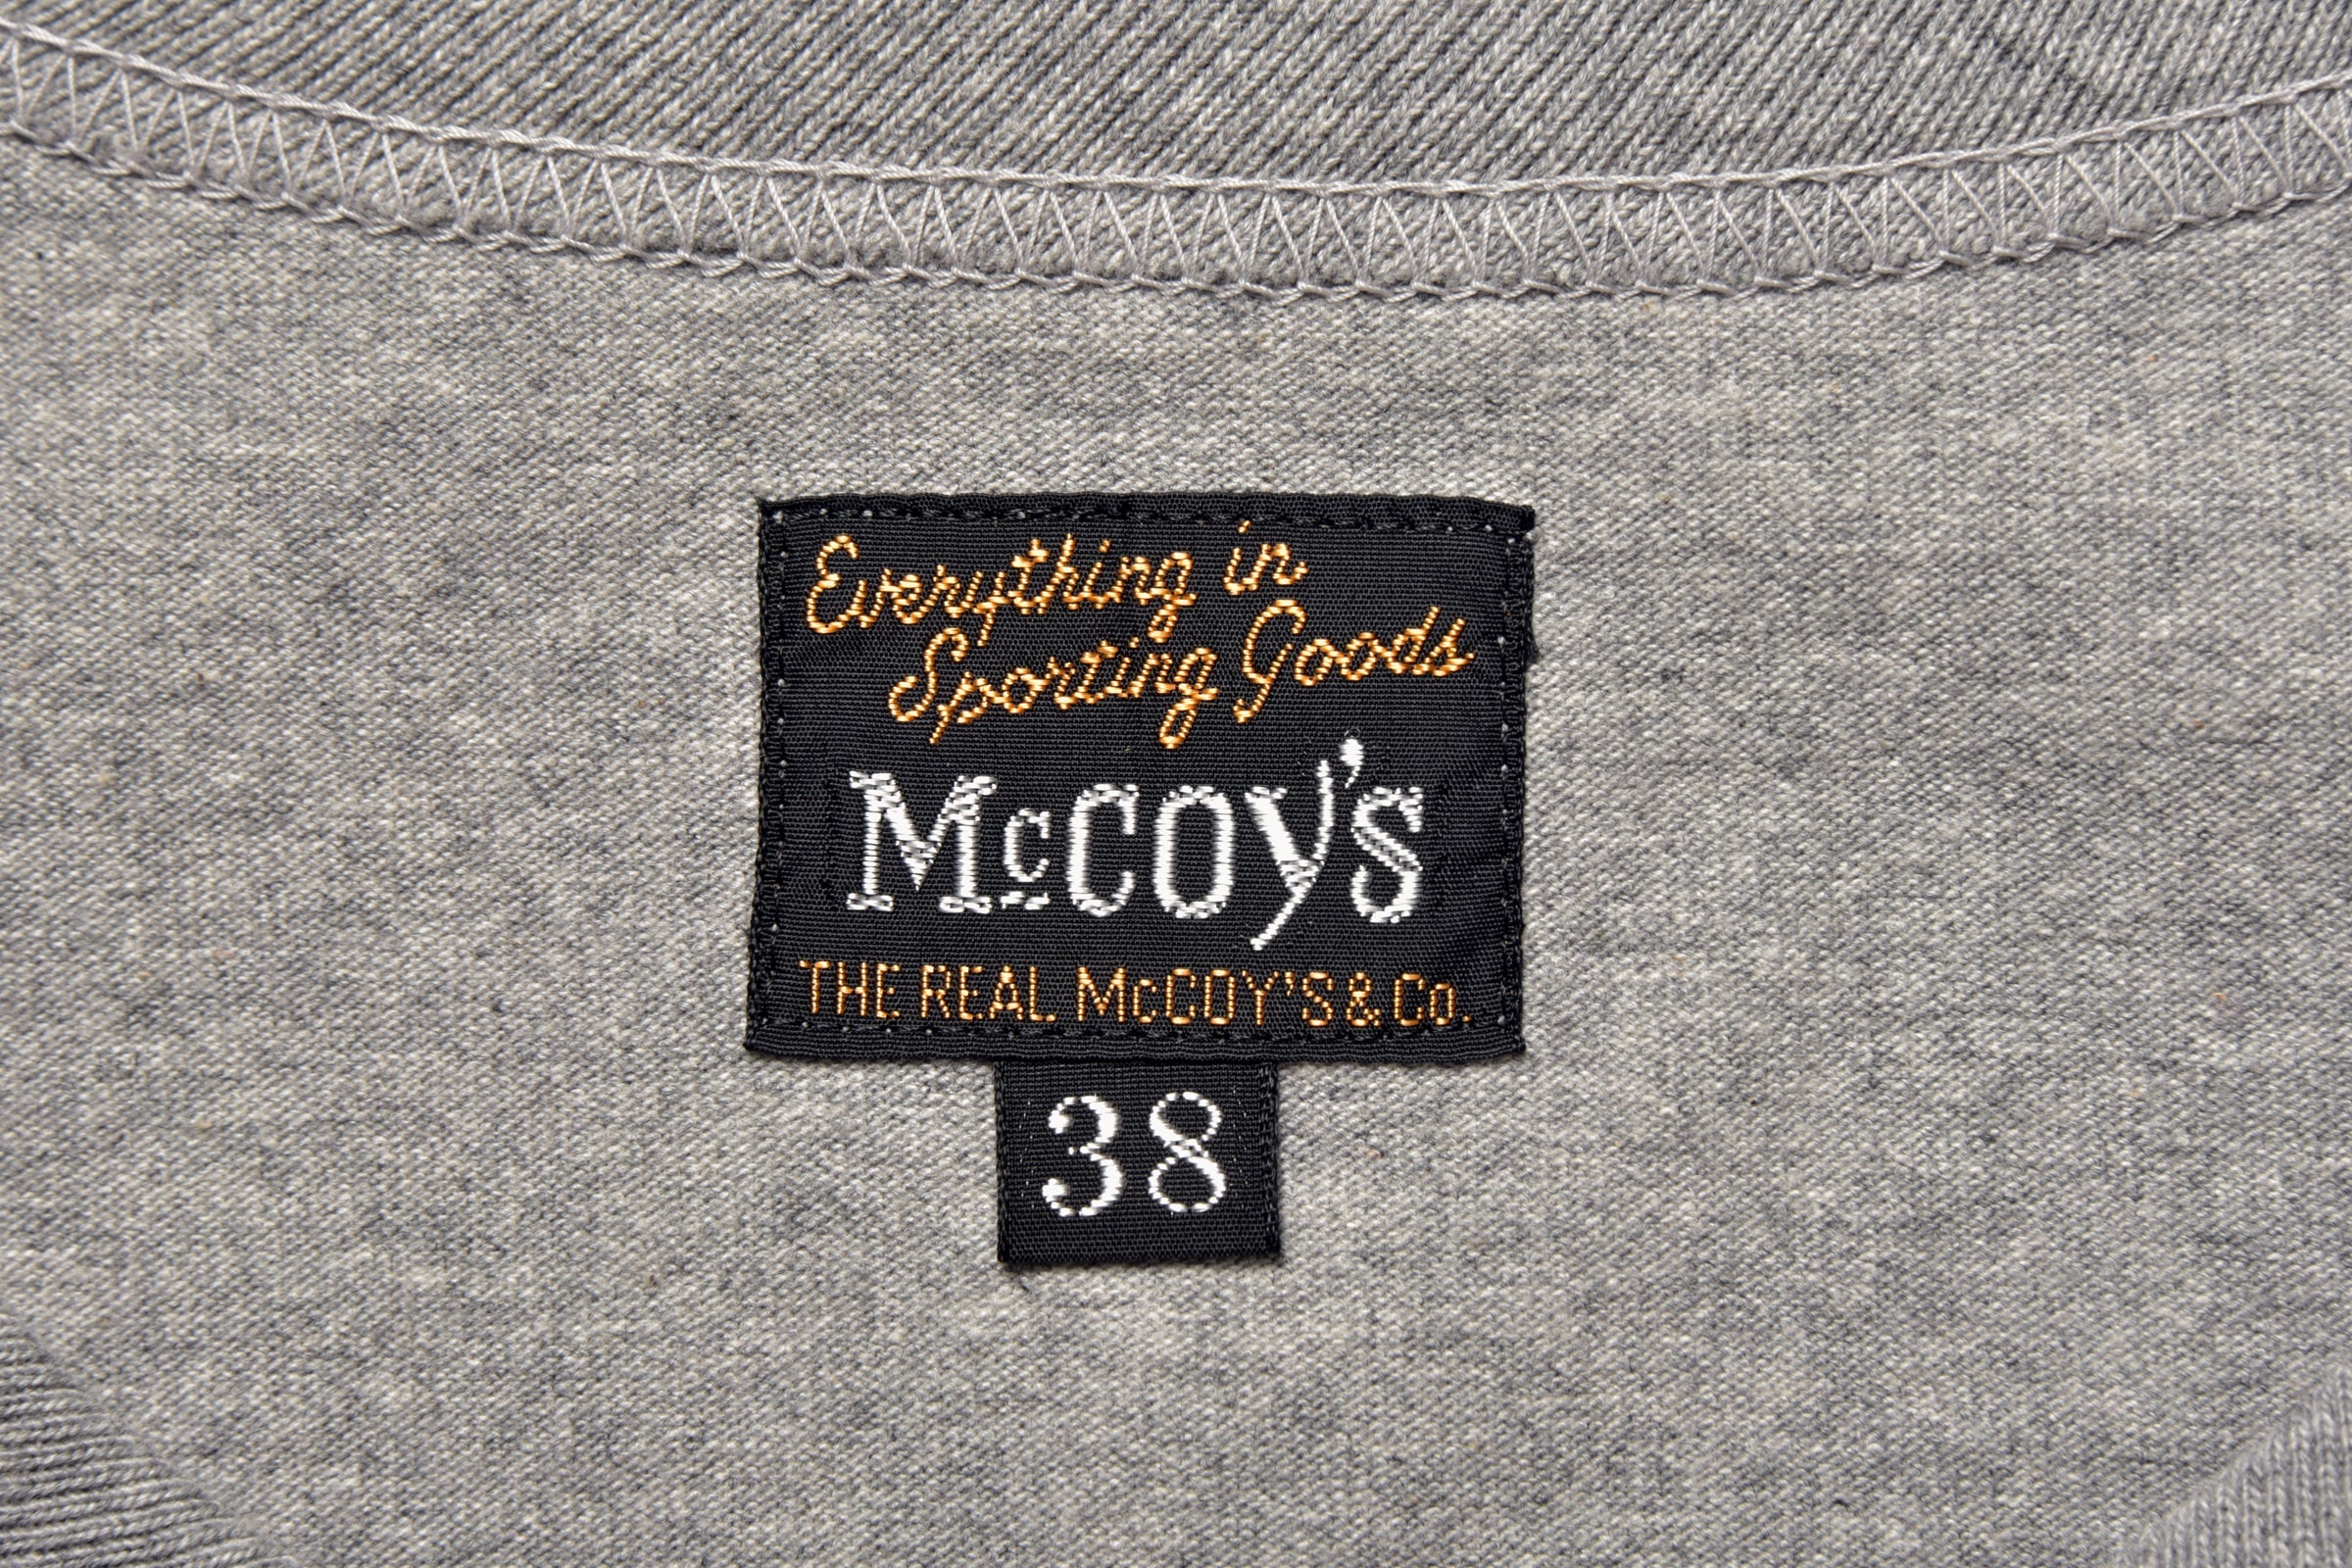 MILITARY TEE / HARGRAVE MILITARY ACADEMY – The Real McCoy's